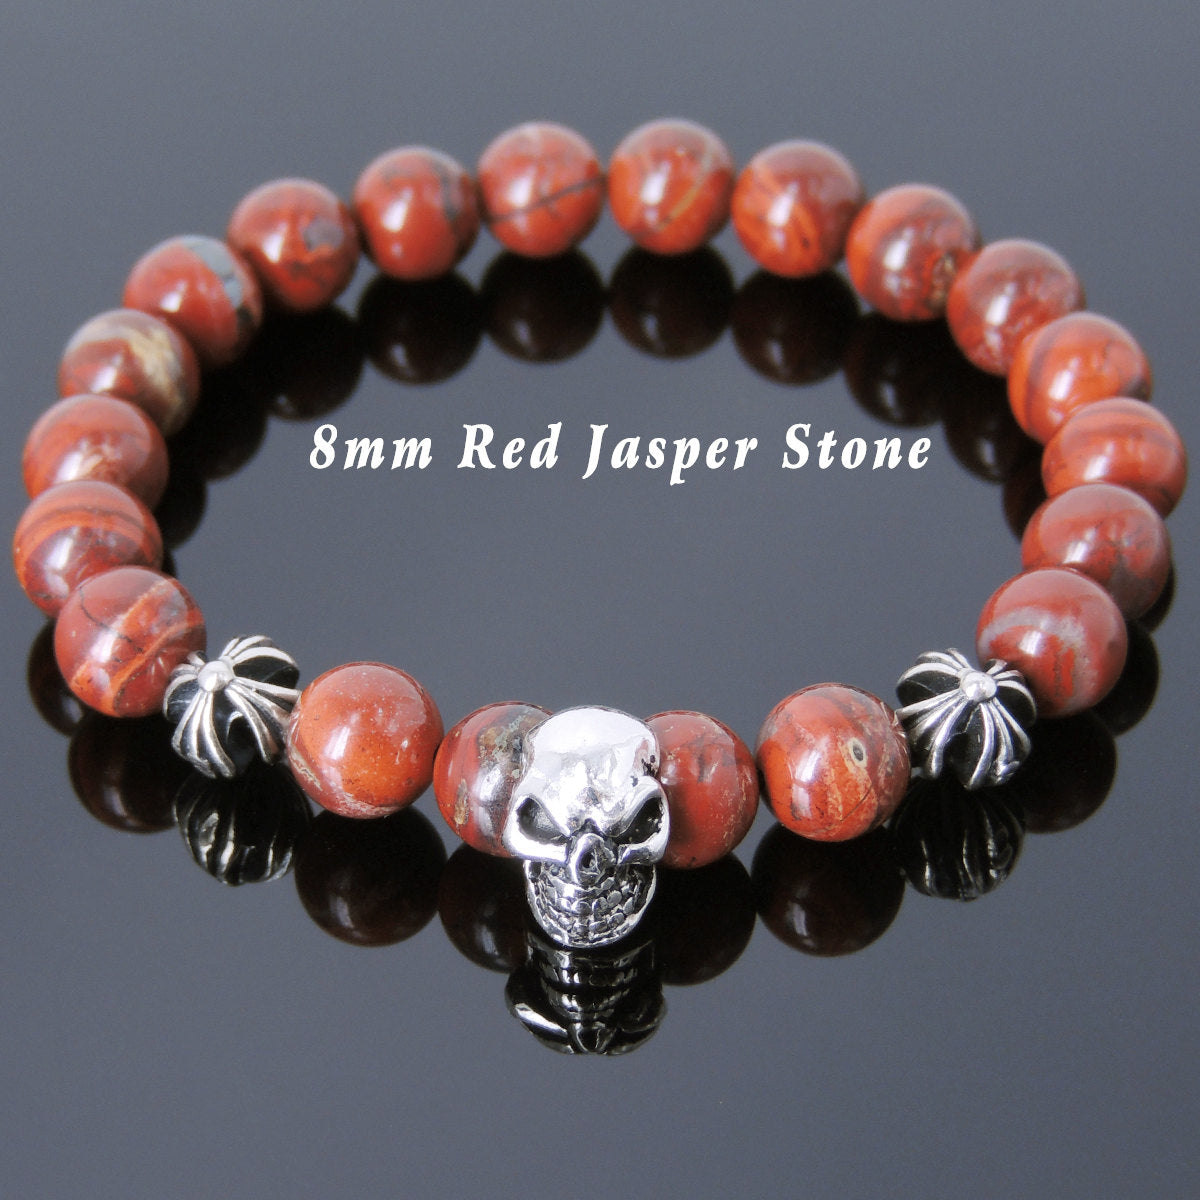 8mm Red Jasper Healing Stone Bracelet with S925 Sterling Silver Protective Skull & Cross Beads- Handmade by Gem & Silver BR757